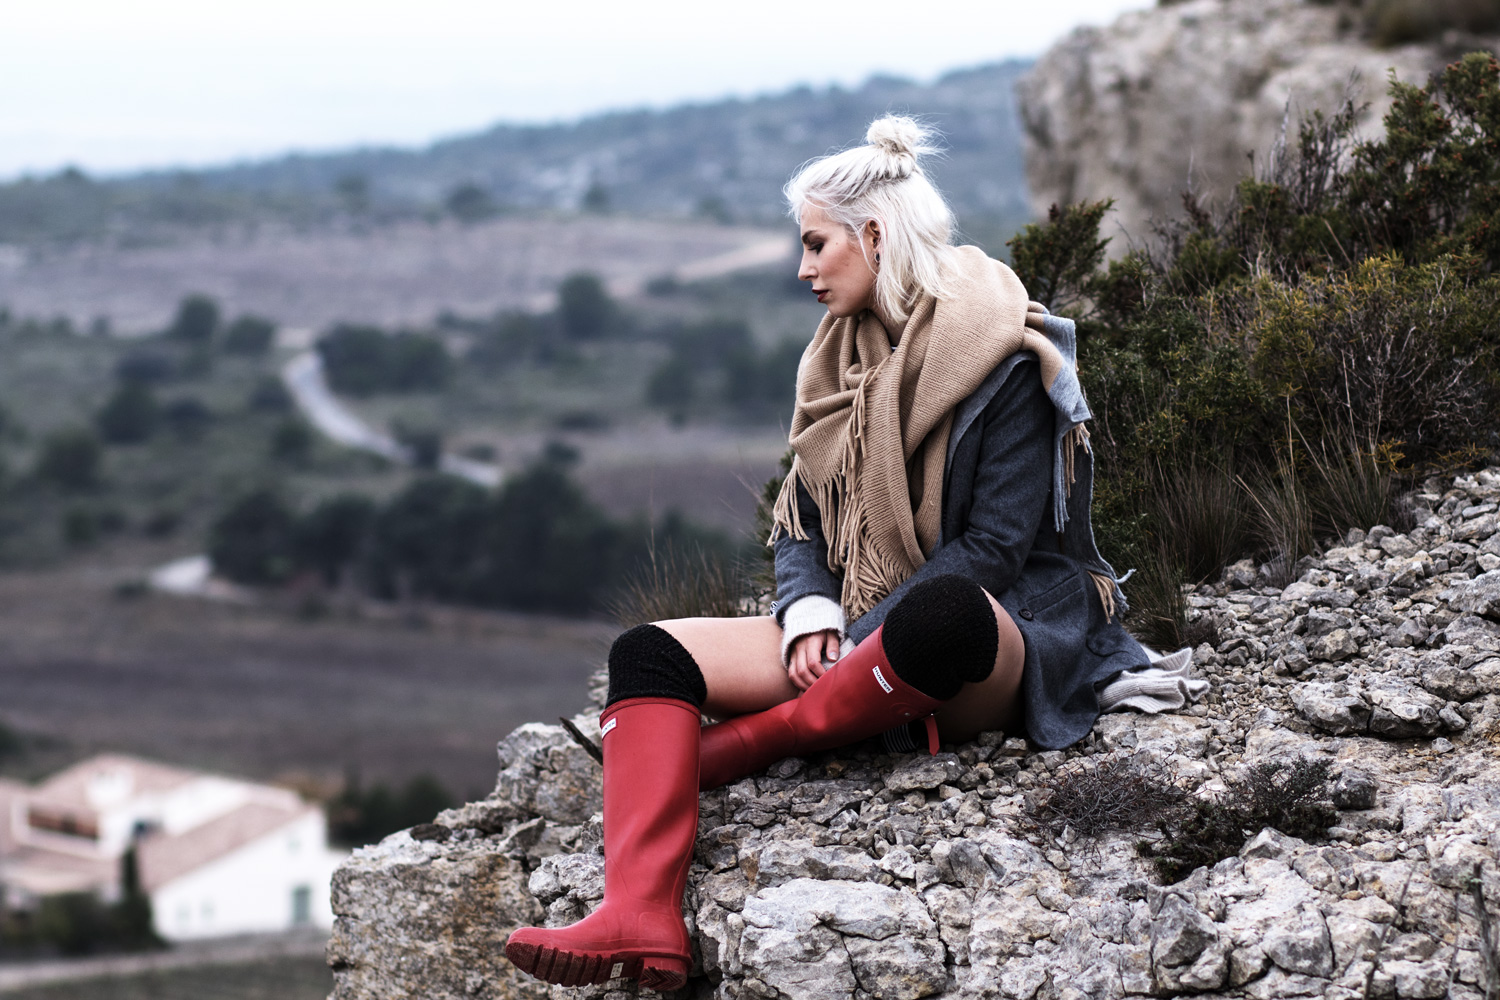 view more details on my blog | wearing Hunter boots, Ganni jacket, Strenesse cardigan | hiking in the mountains | outfit, editorial, fashion